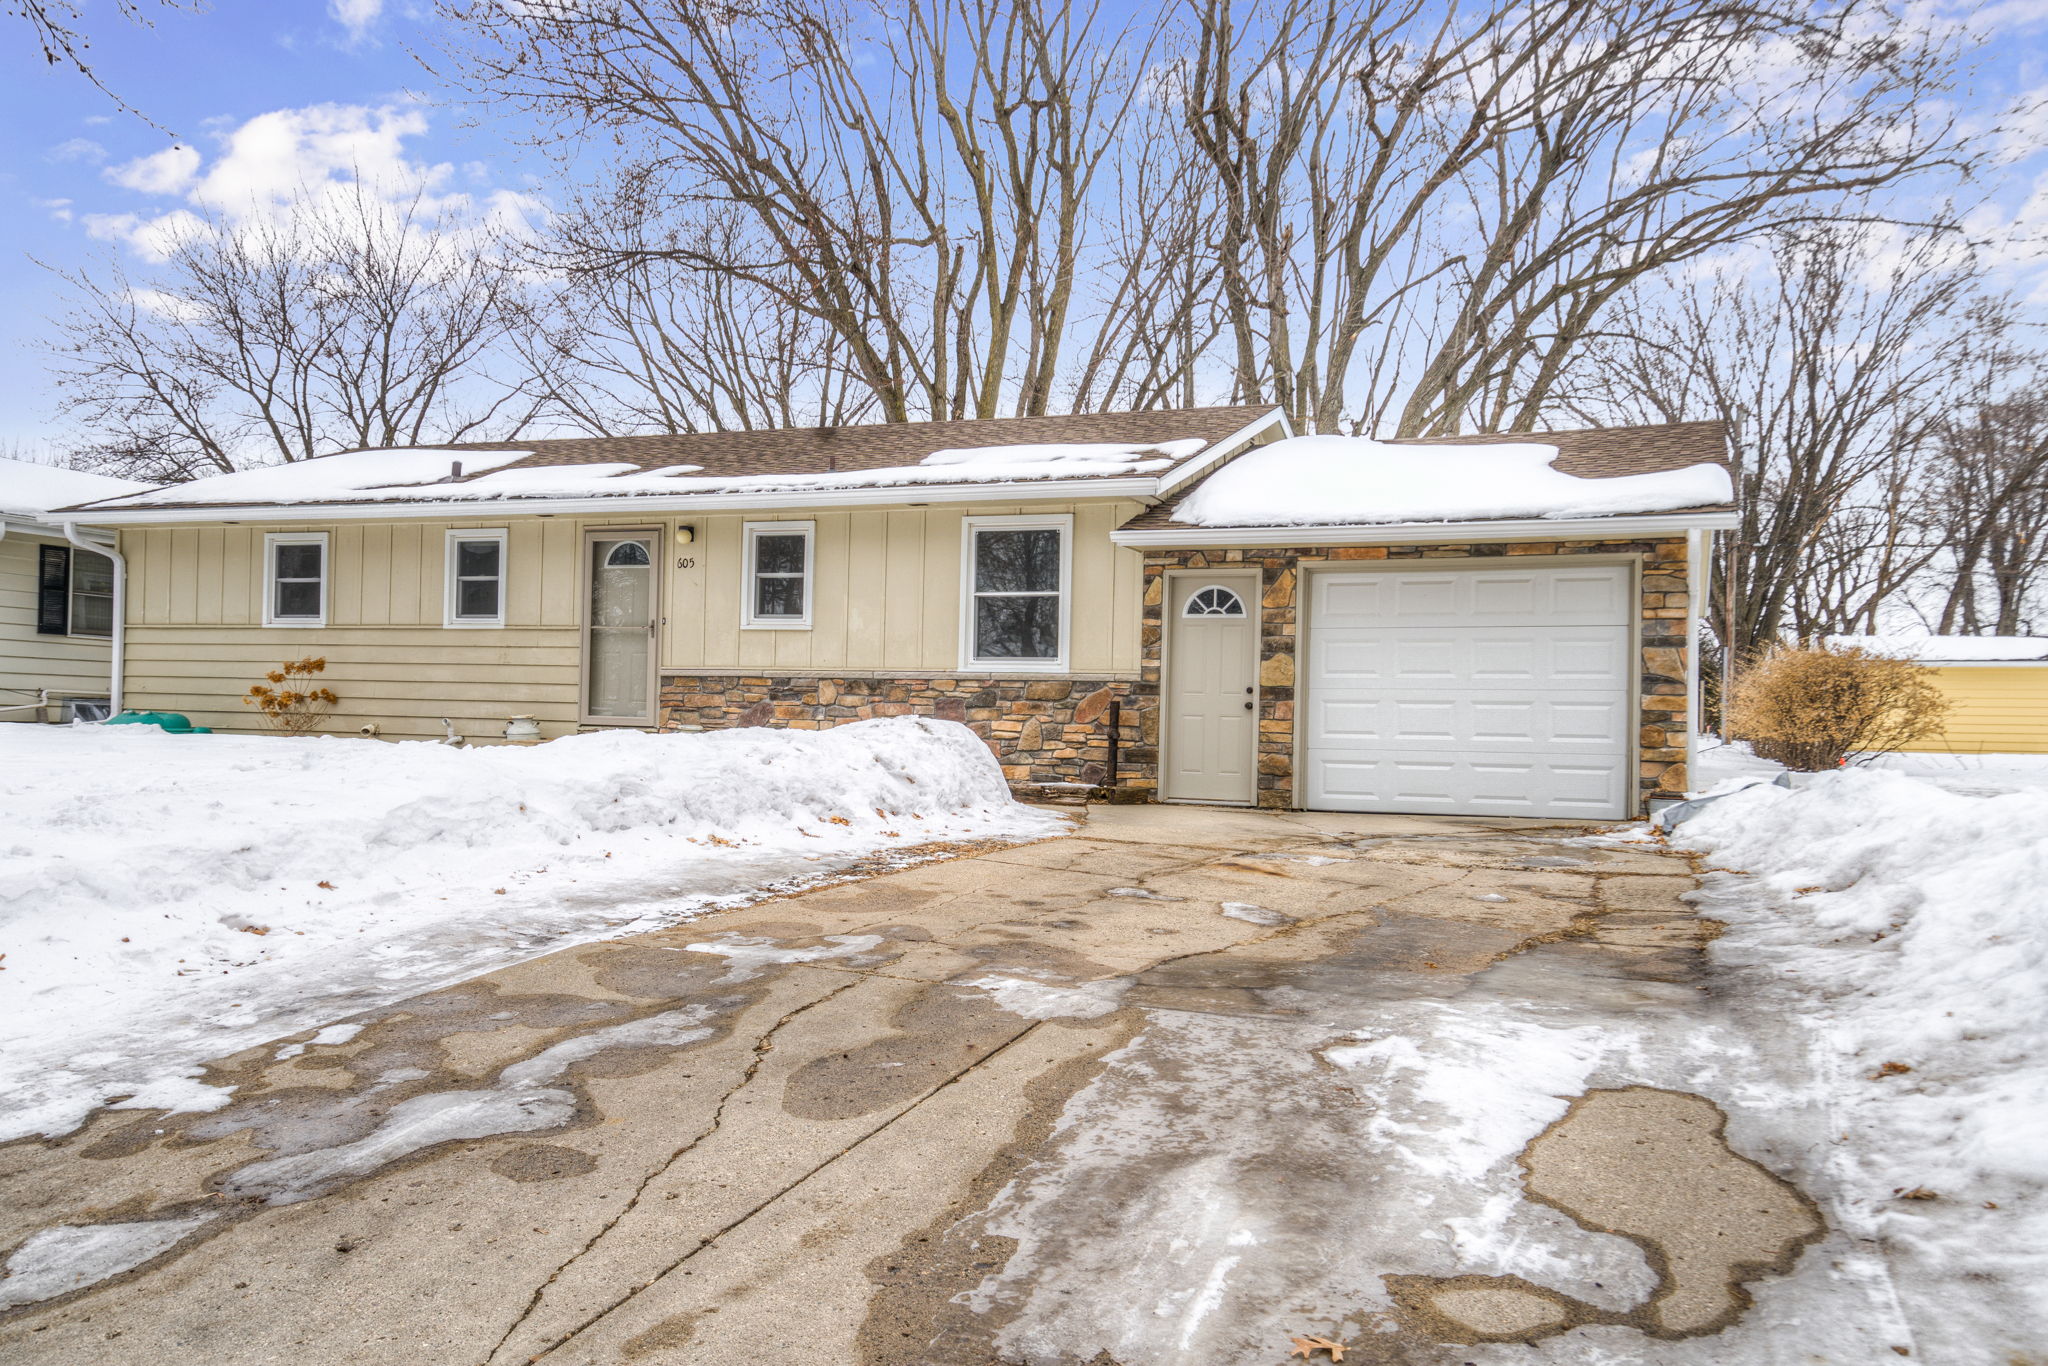  605 Franklin Ave SW, Watertown, MN 55388, US